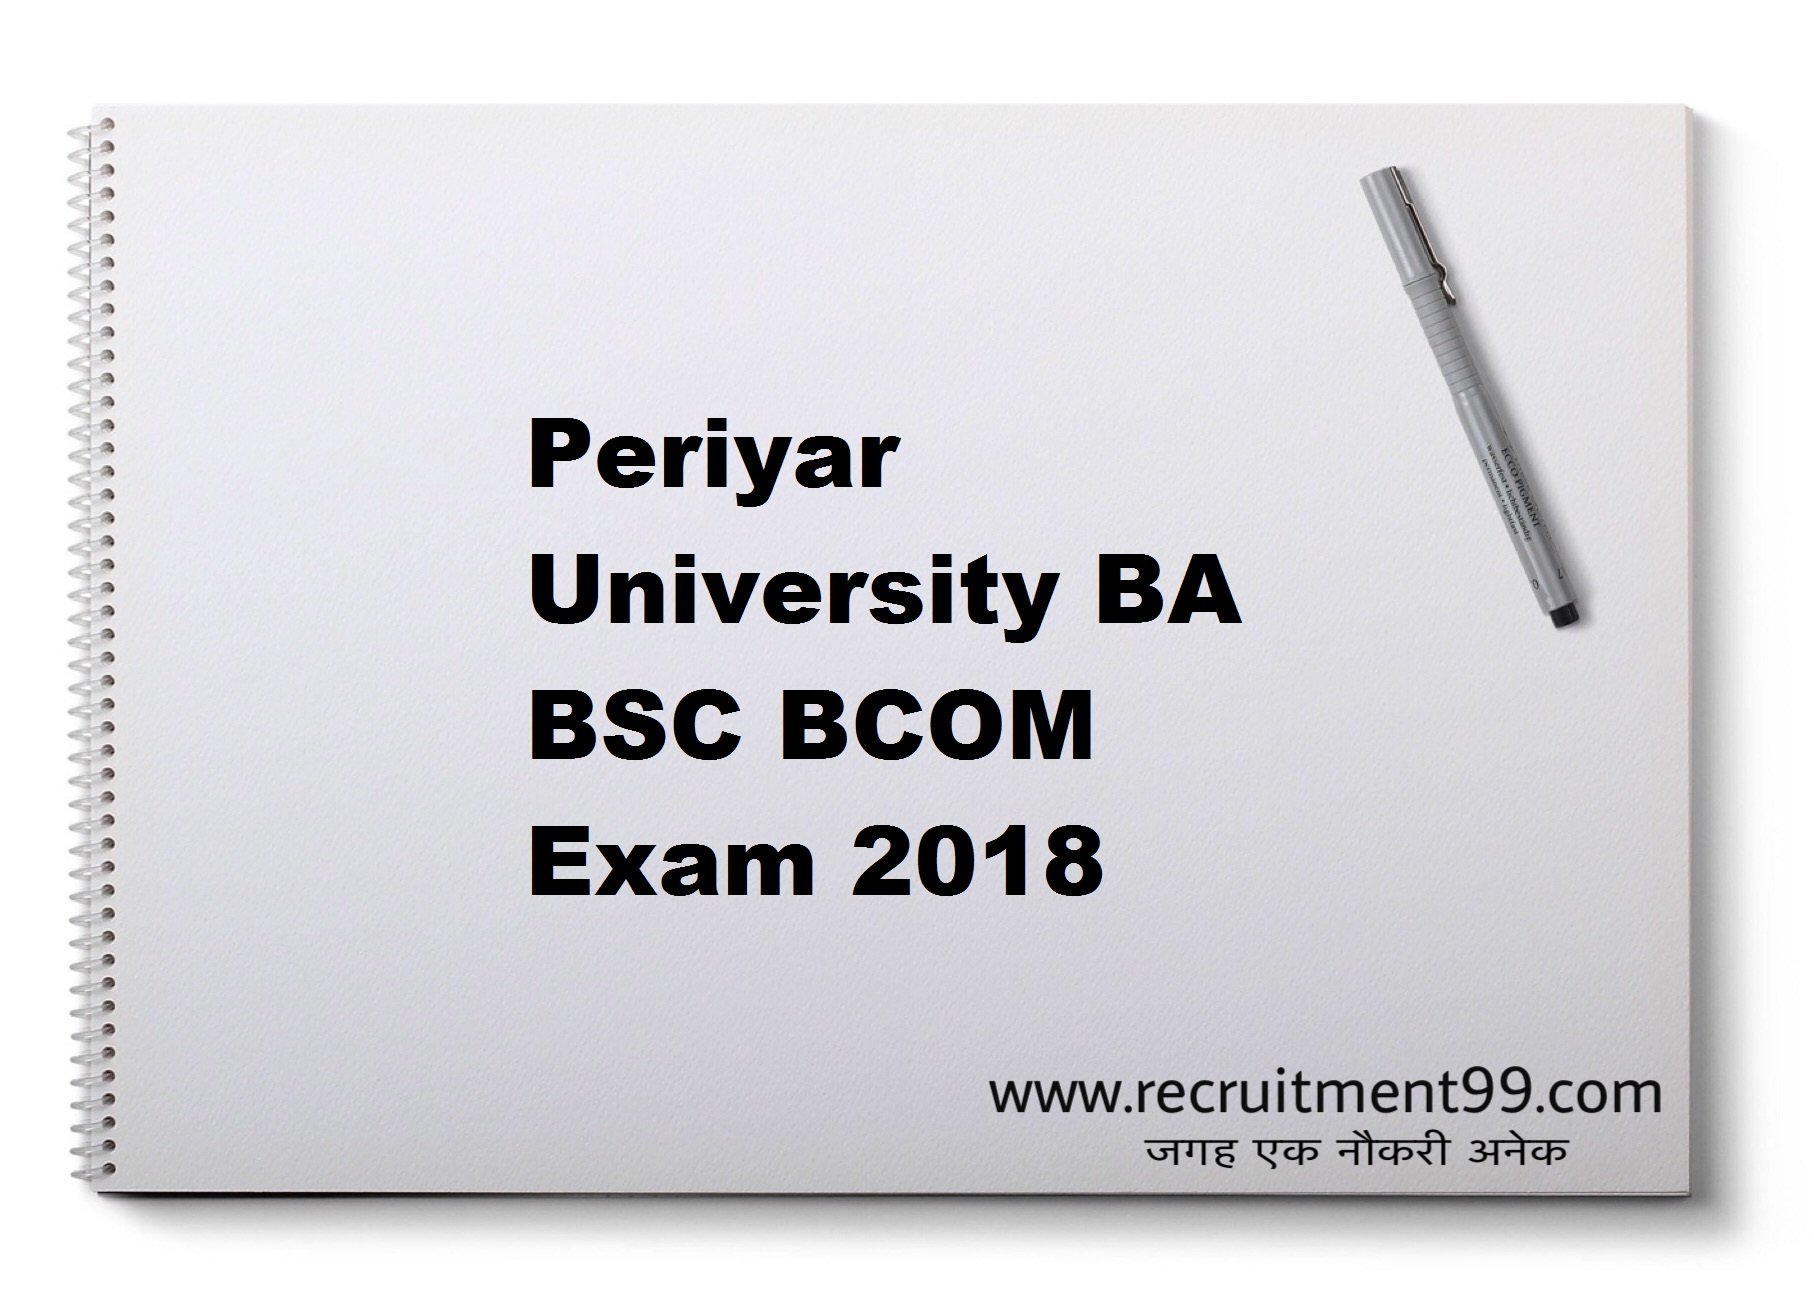 Periyar University BA BSC BCOM Hall Ticket Time Table Result 2018